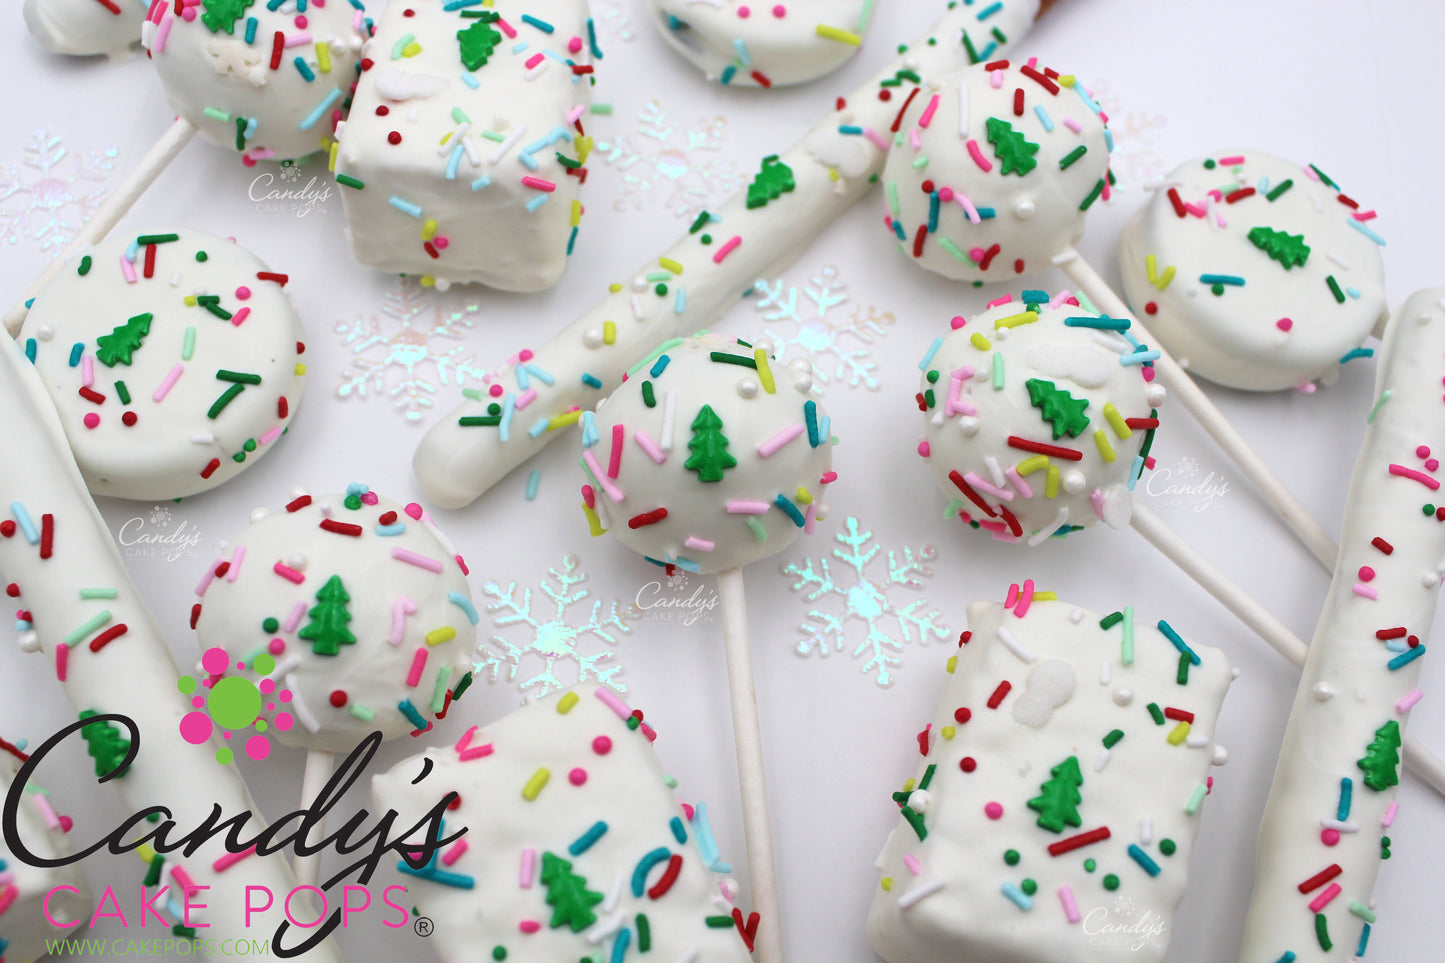 Whimsical Christmas Tree Party Variety Package: Cake Pops, Oreos, Rice Krispies, & Pretzel Rods! - Candy's Cake Pops